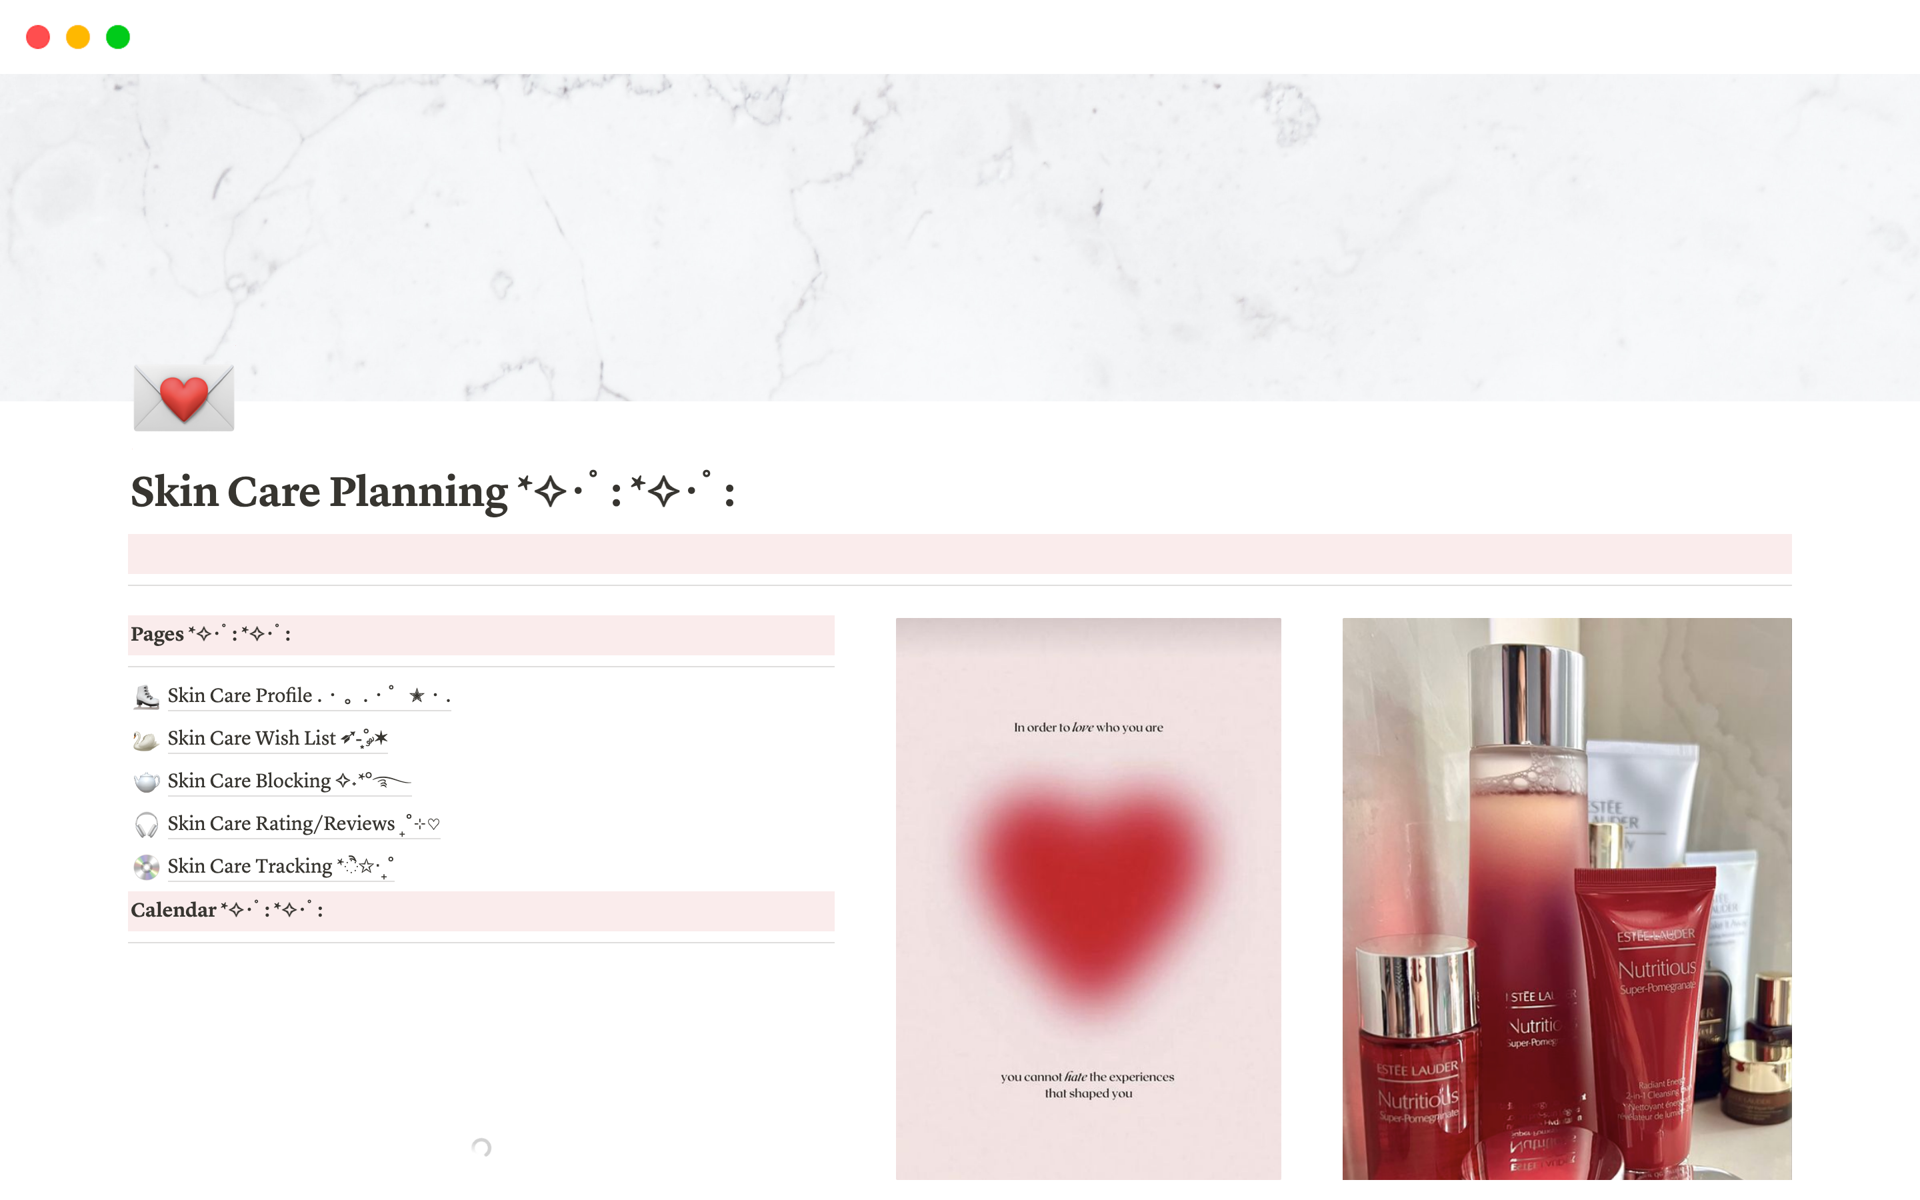 The Skincare Planning Notion Template includes pages for Skincare Profile, Skincare Wish list, Skincare Blocking, Skincare Rating/Reviews, and Skincare Tracking, offering a complete solution for optimizing your skincare routine.